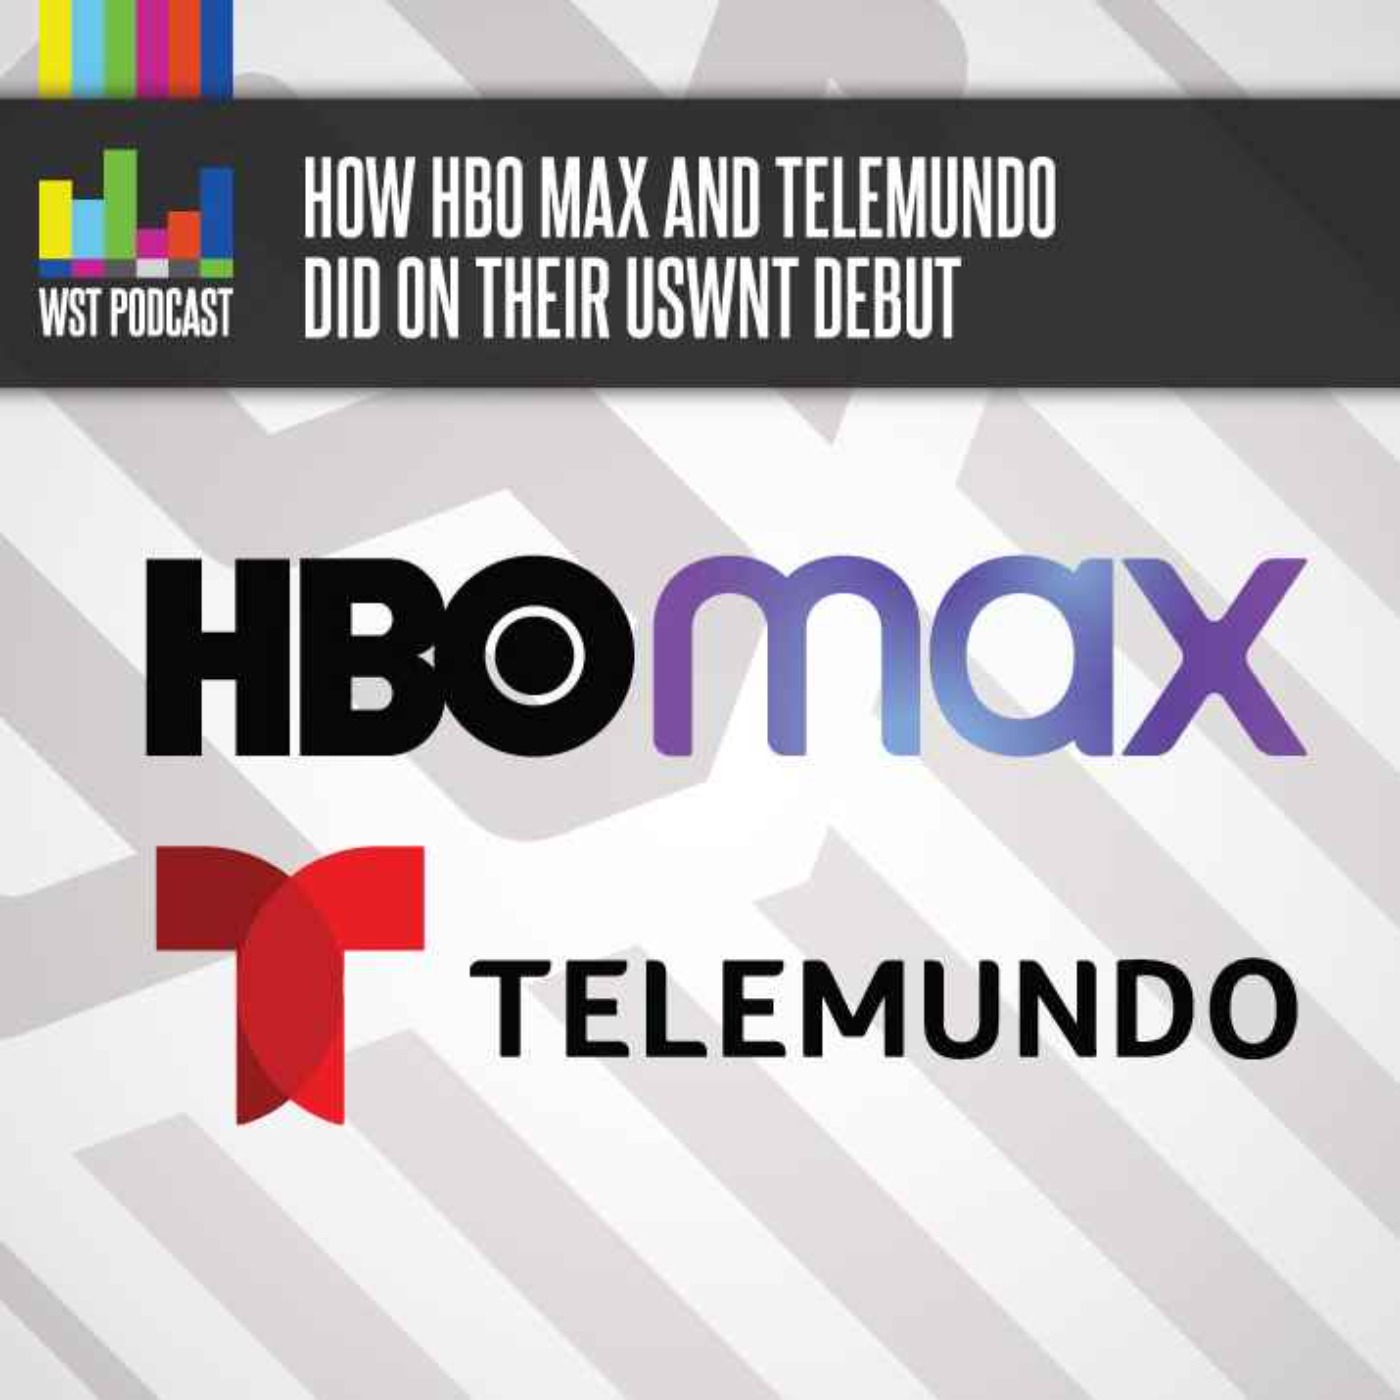 How HBO Max & Telemundo did on USWNT debut